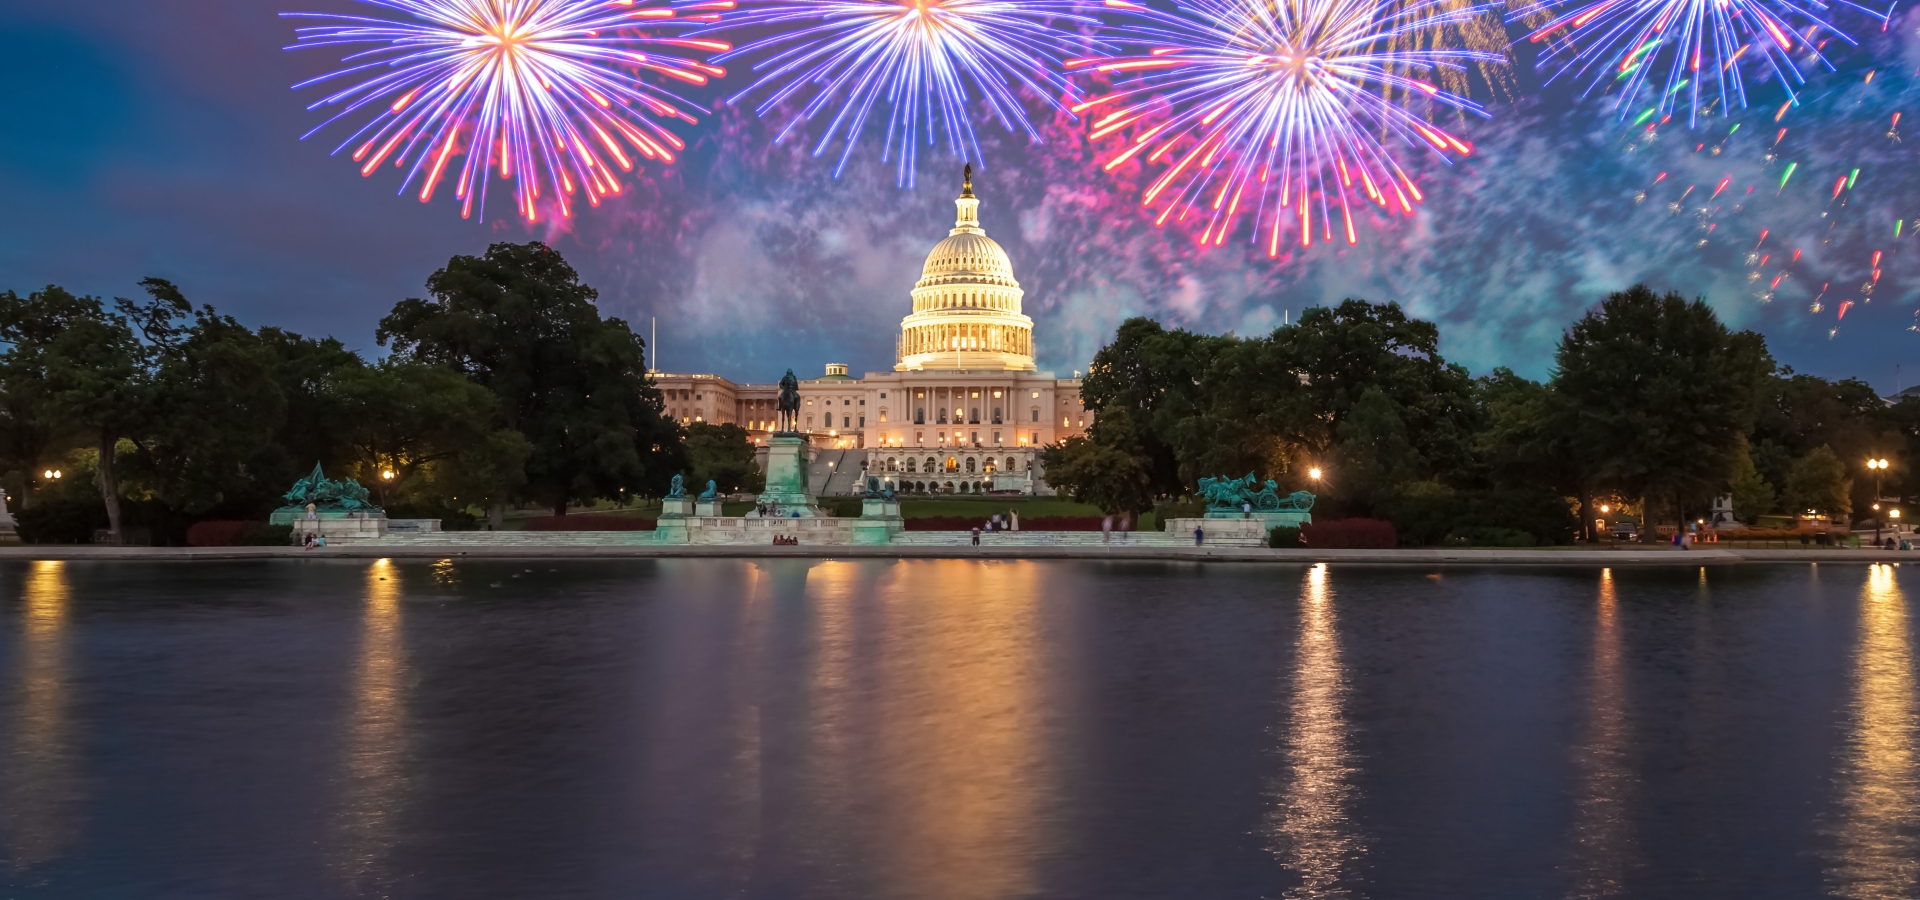 fireworks above the capital building in washington, dc